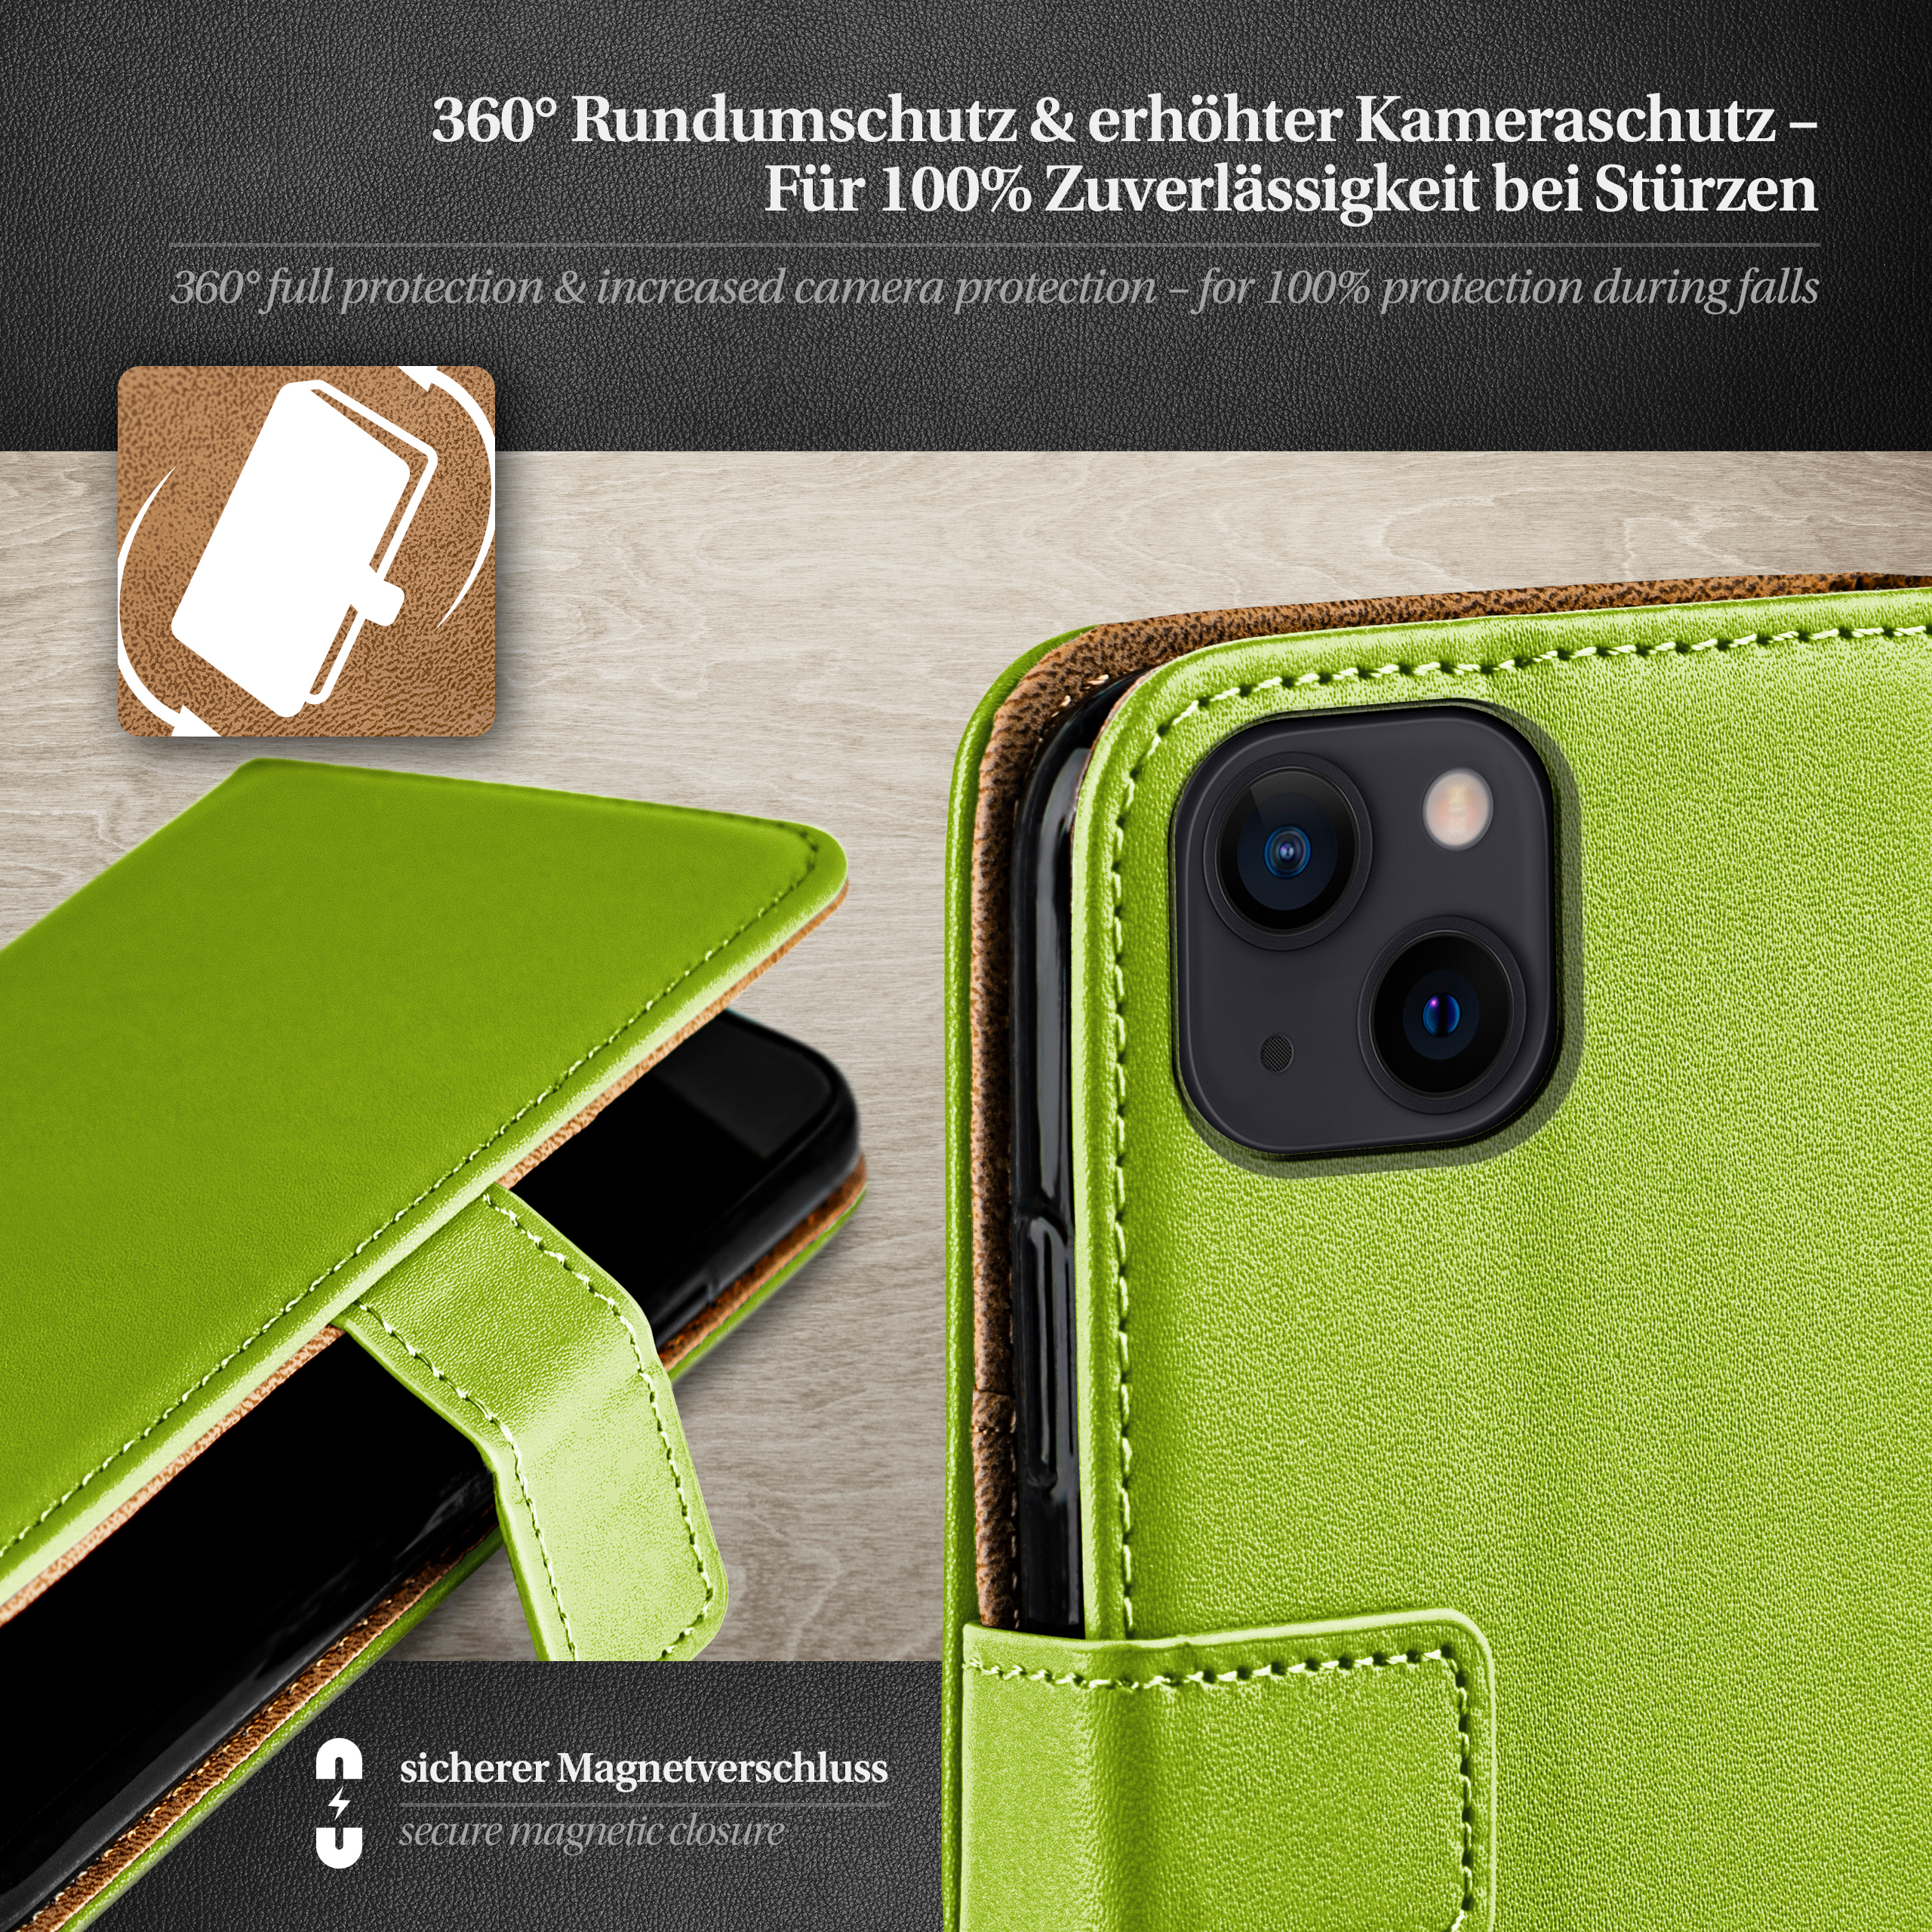 MOEX Book Case, Bookcover, iPhone Lime-Green Apple, 14